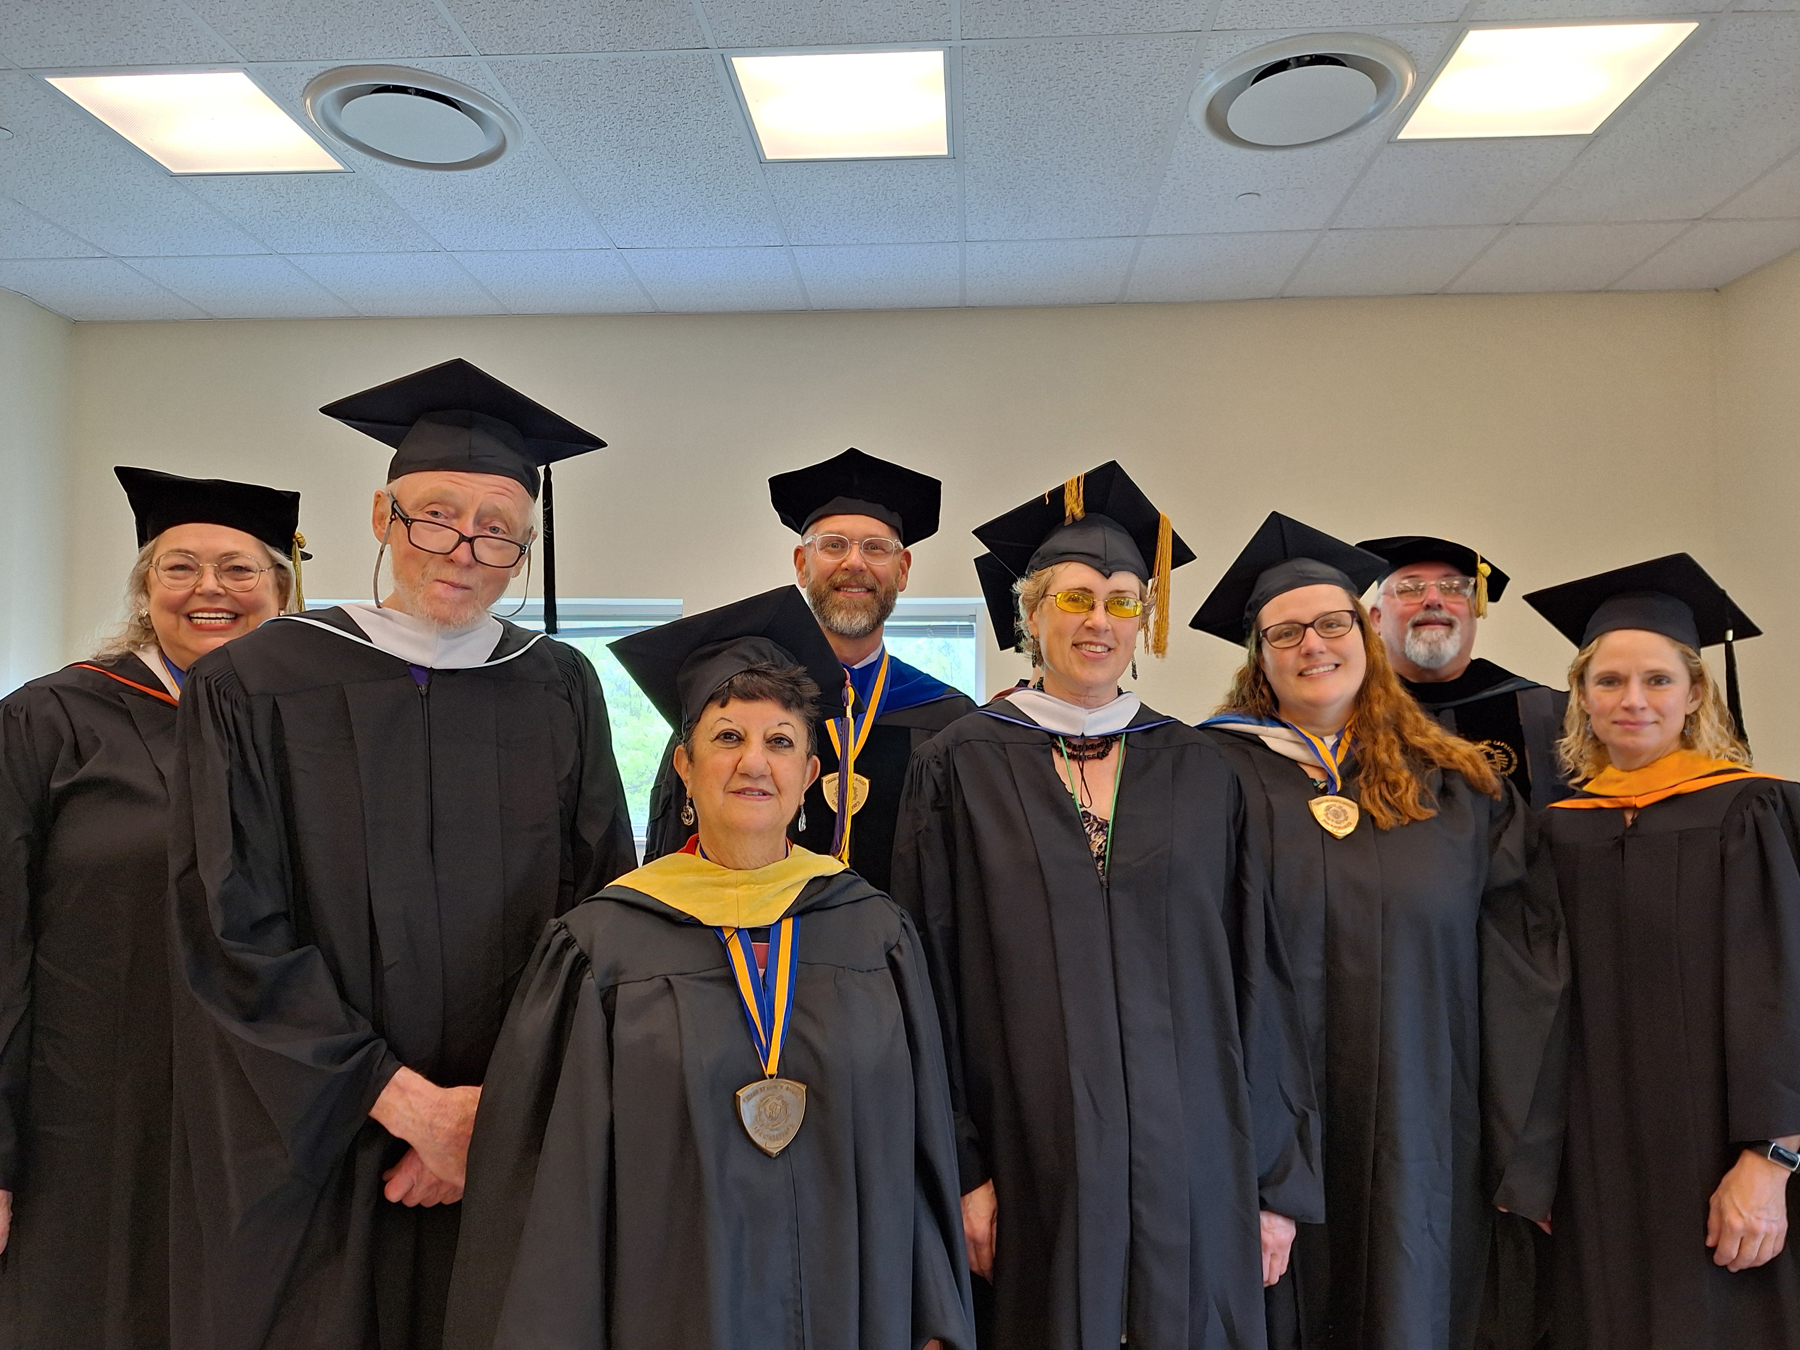 Liberal Arts faculty in caps and gowns, standing inside, smiling